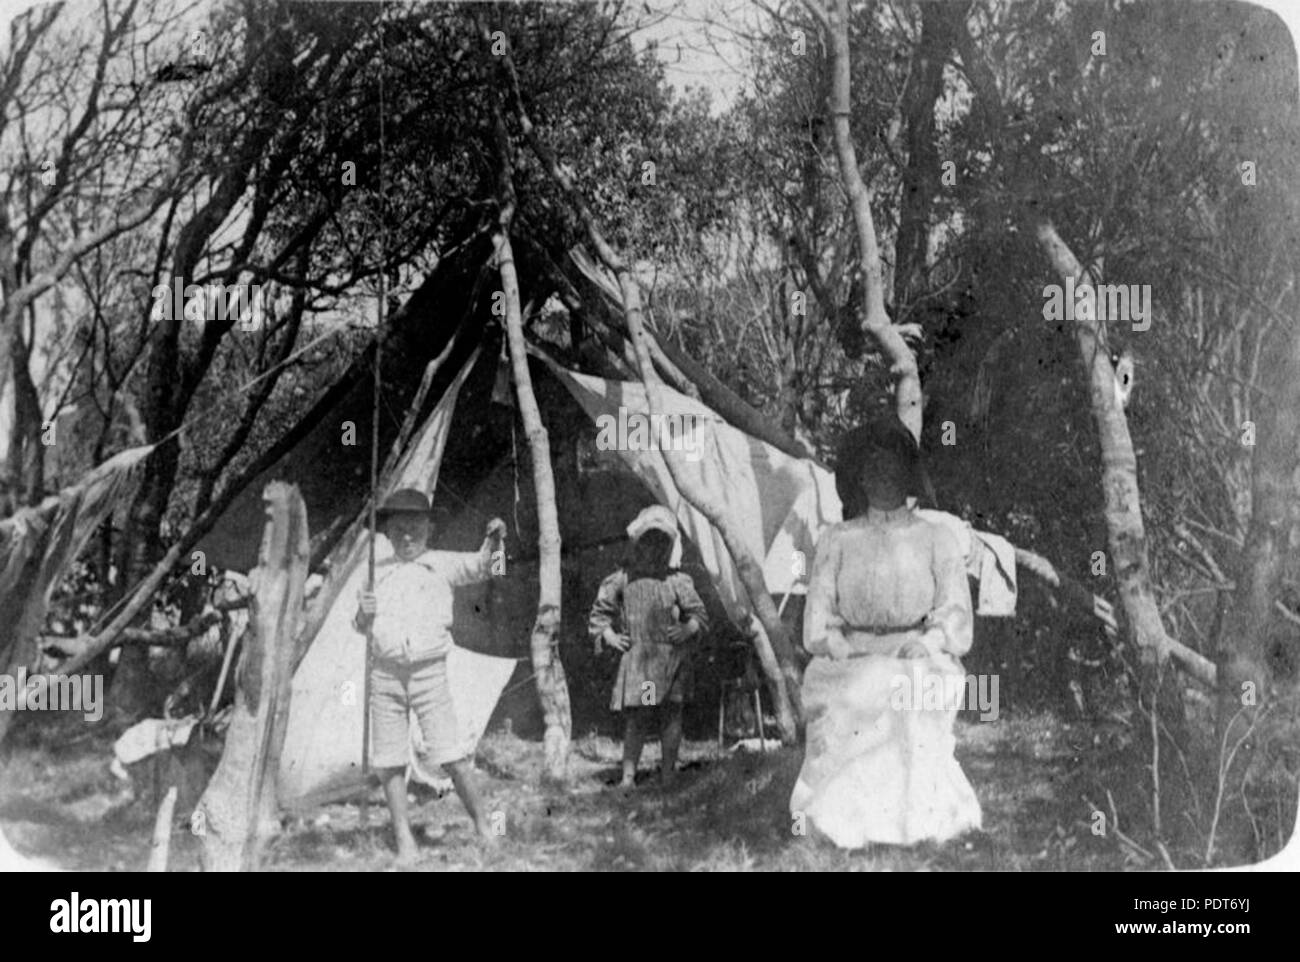 237 StateLibQld 1 166435 Familie Camping in Tweed River, New South Wales, 1905 Stockfoto